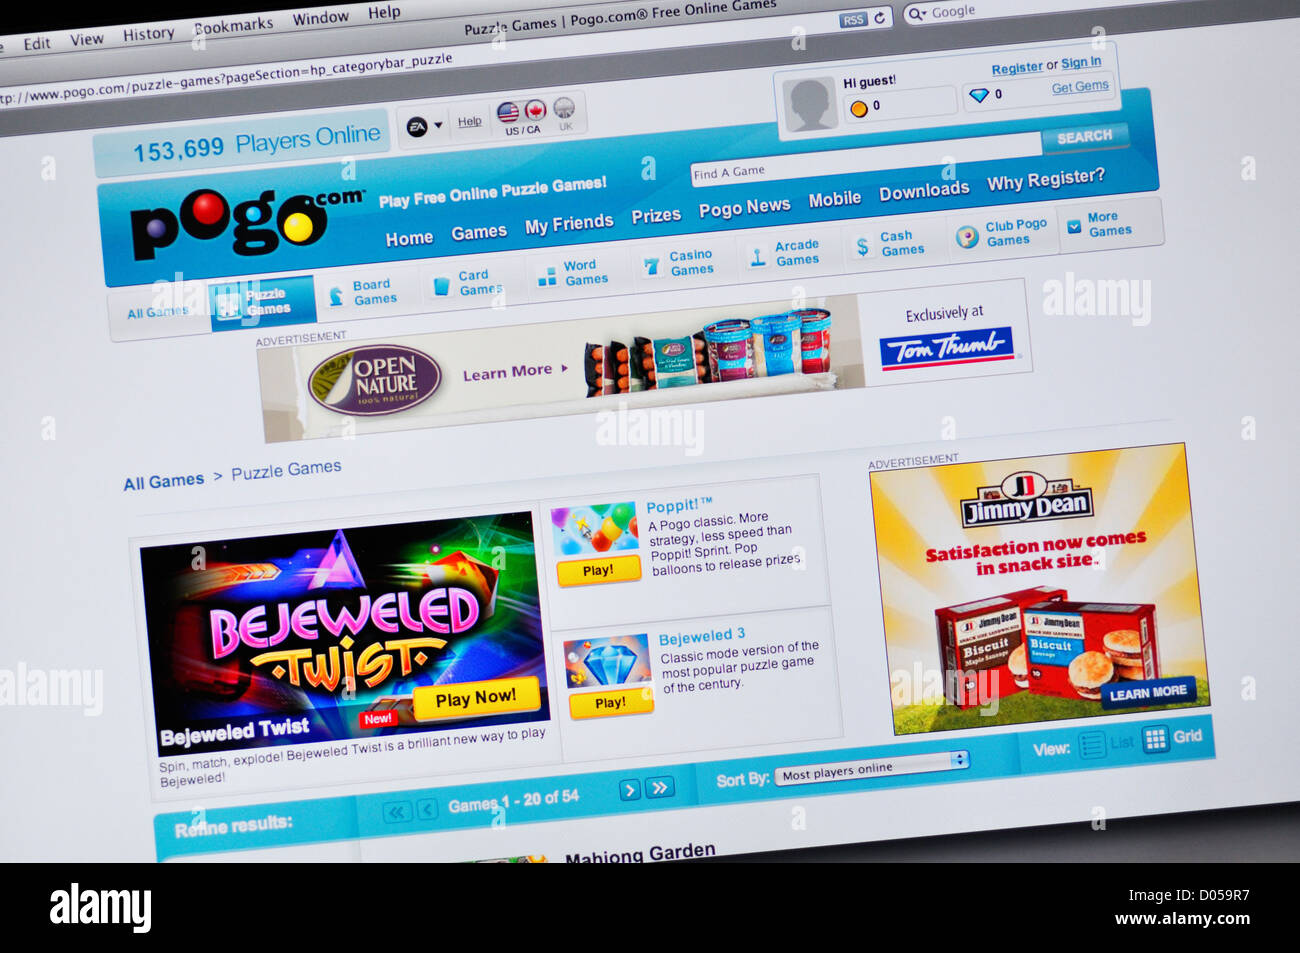 POGO website - online puzzles and games Stock Photo - Alamy